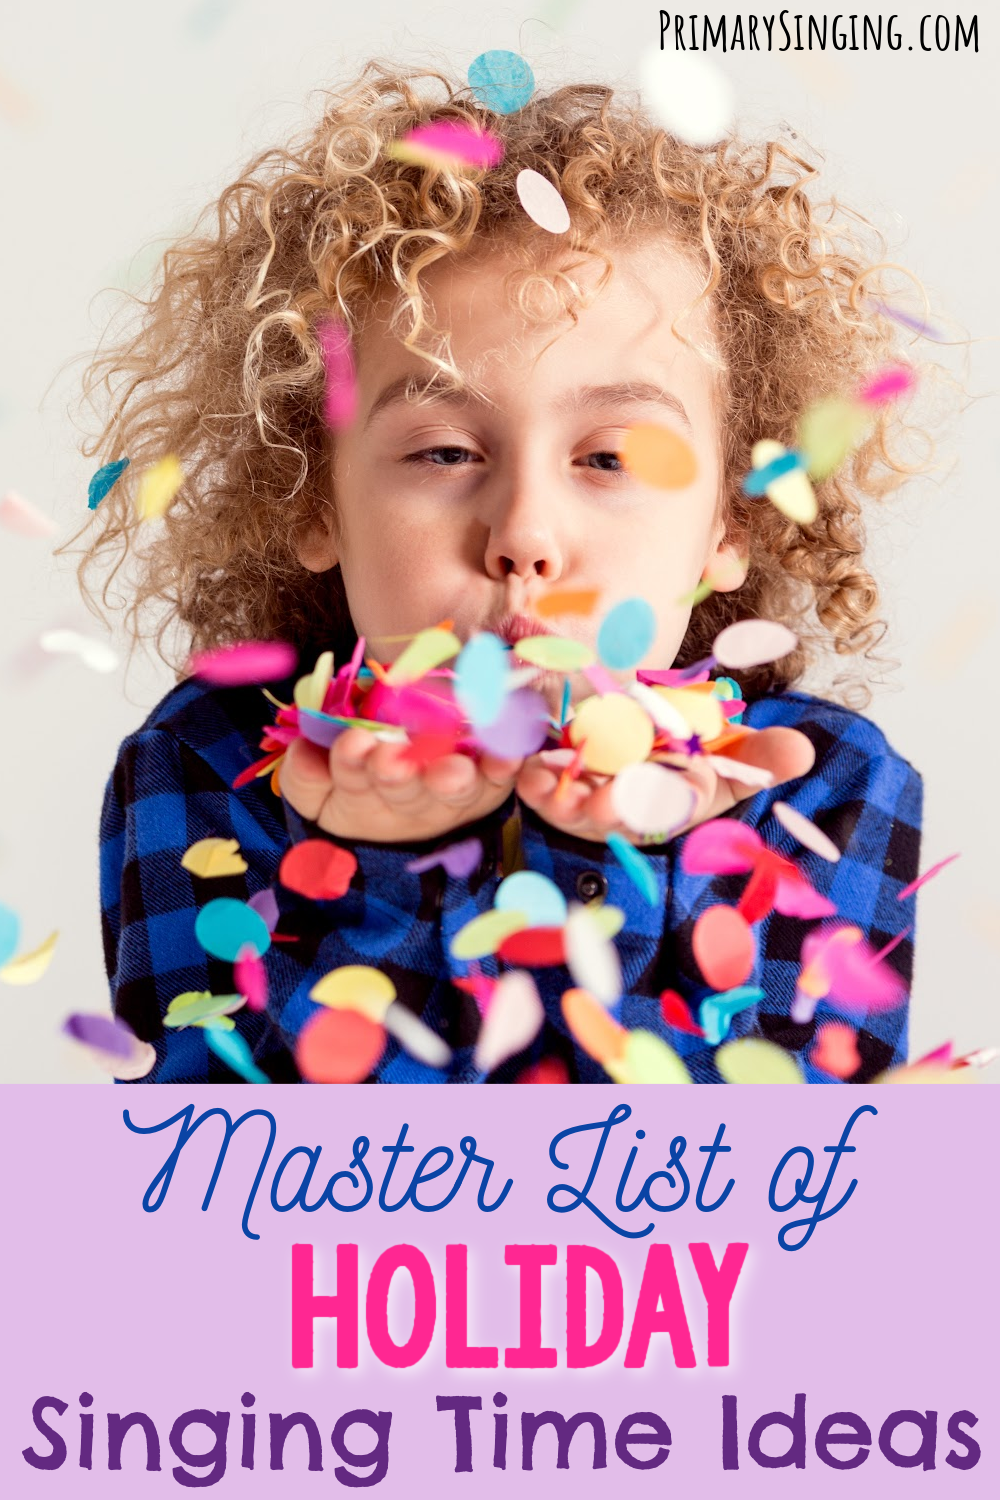 Master list of Holiday Singing Time Ideas - TONS of fun activities for all the seasons, occasions, and holidays throughout the year! Activities for LDS Primary music leaders.

Including: New Year's, Valentine's Day, St Patrick's Day, Easter, General Conference, Mother's Day, Father's Day, Summer, 4th of July, Pioneer Day, Back to School, Primary Program, Halloween, Thanksgiving, Christmas this post has quick links to help you throughout the year.